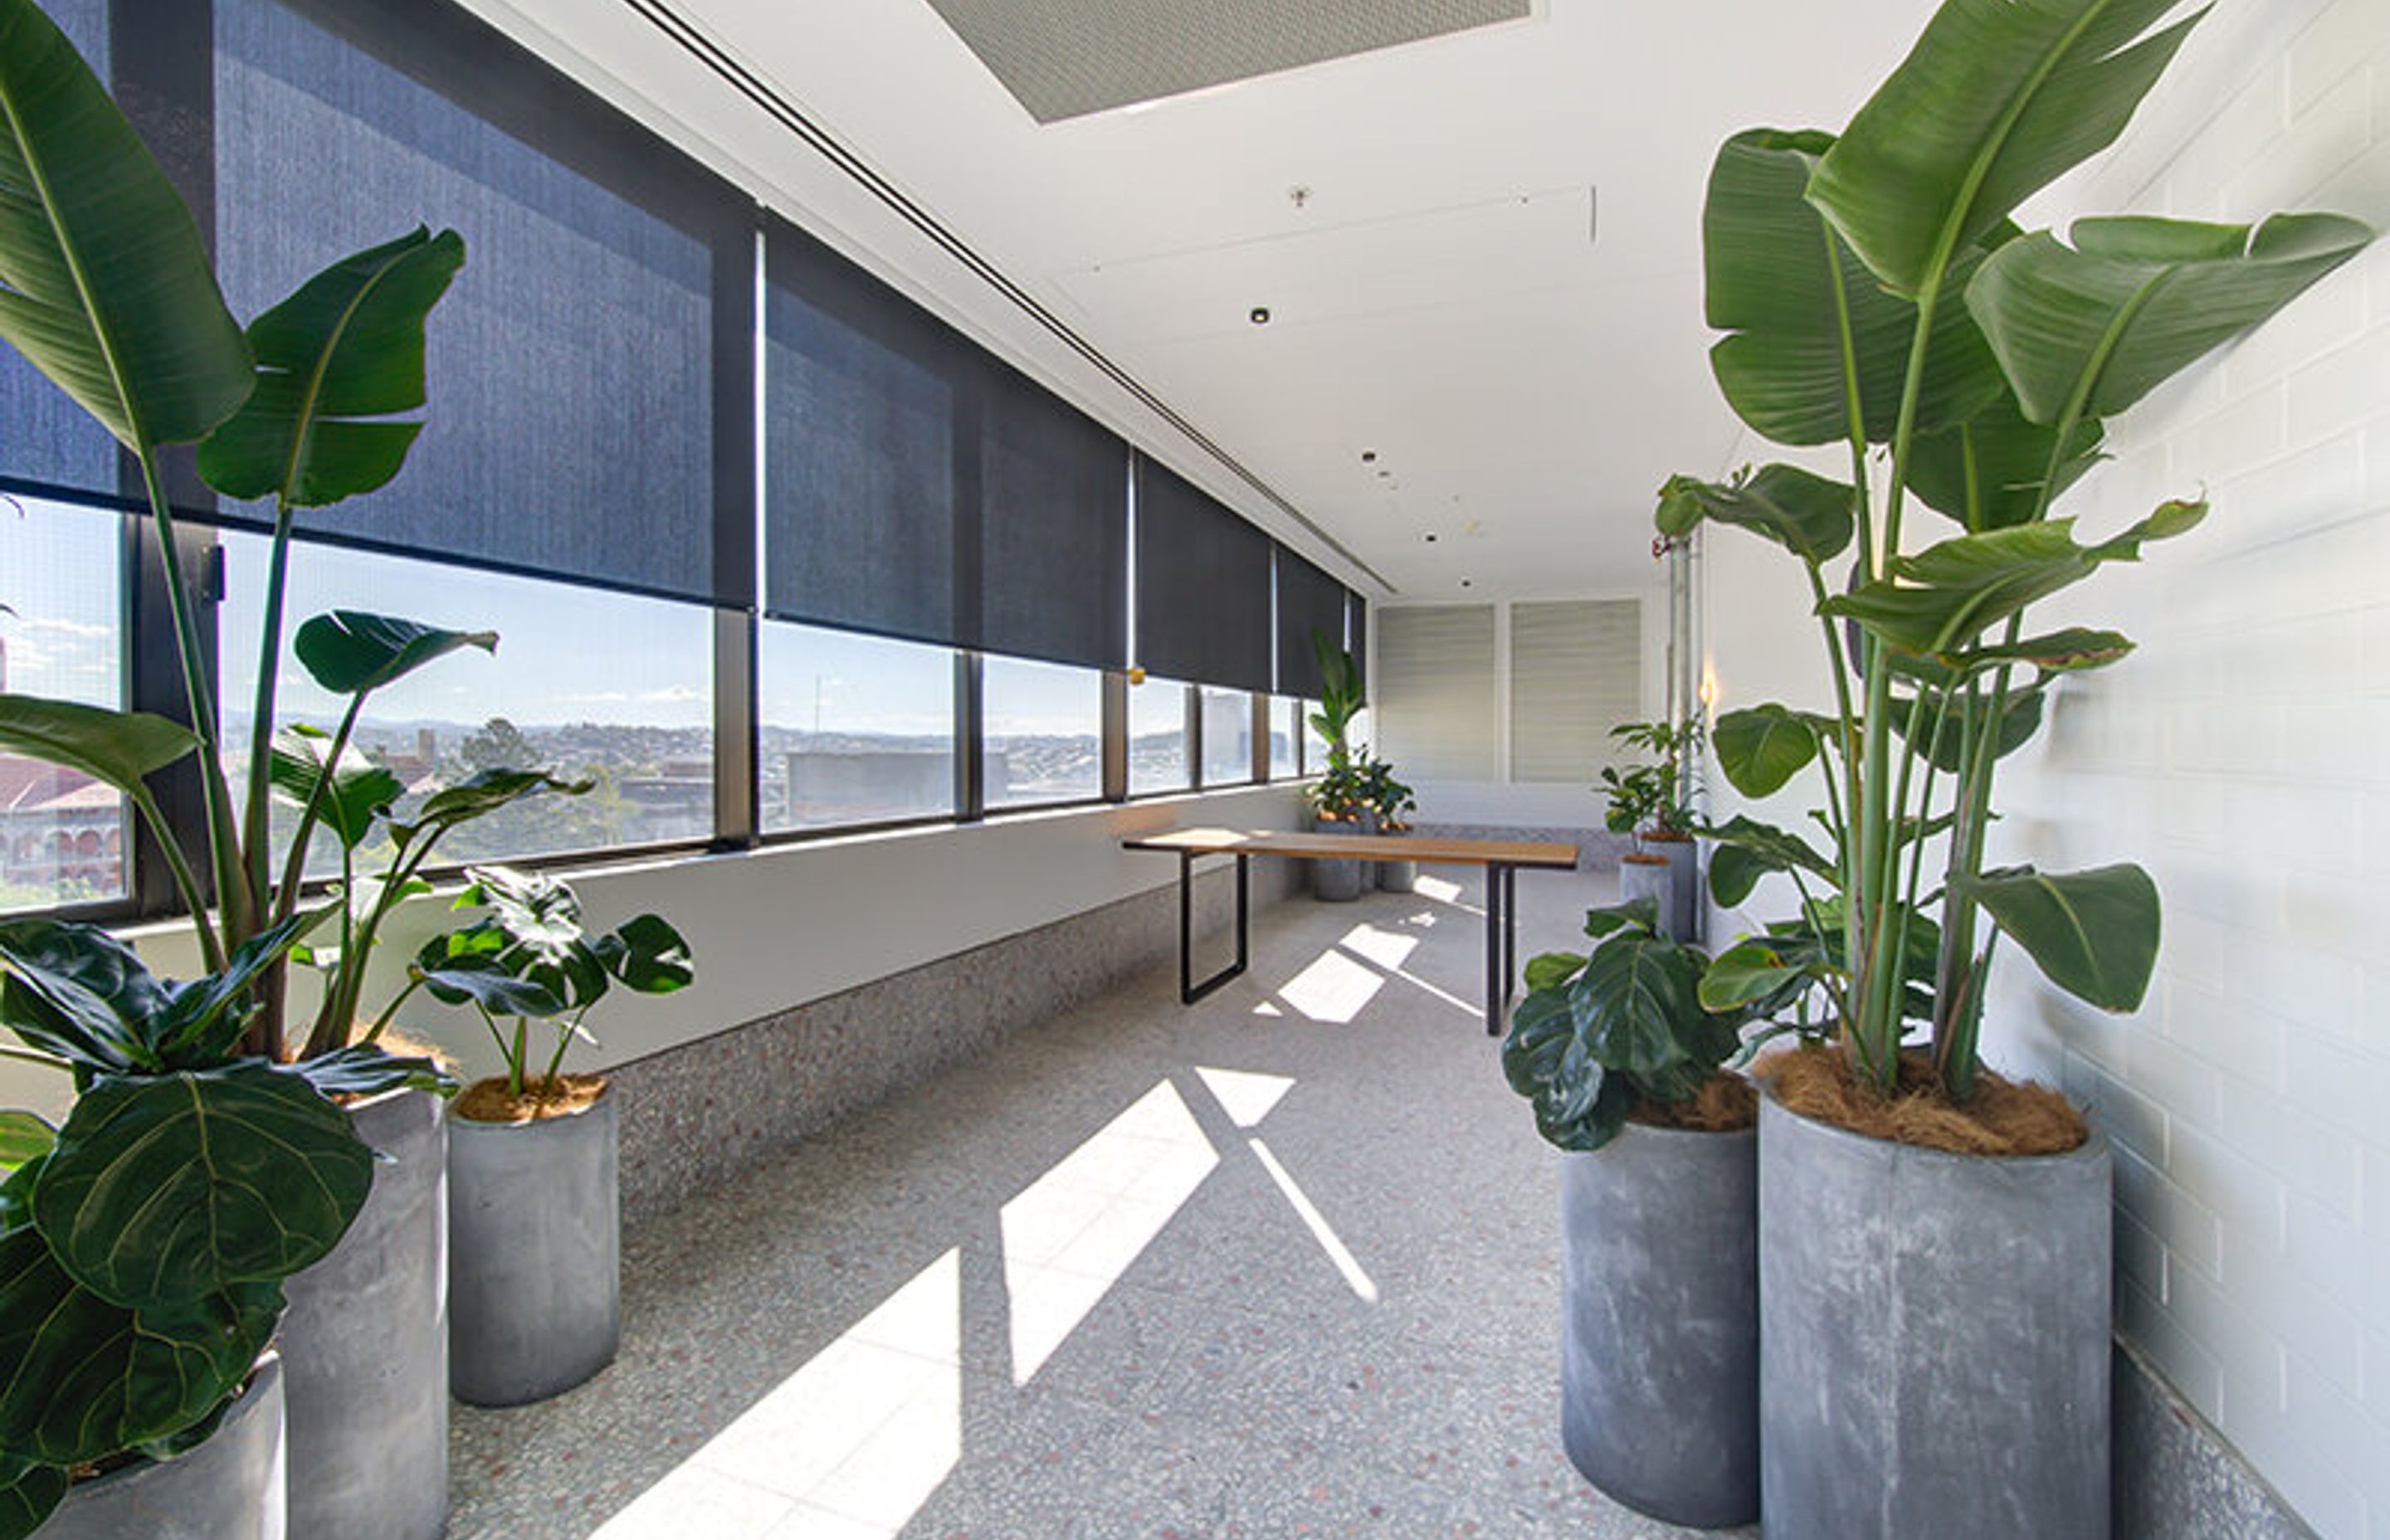 Covet Terrazzo at the heart of Herston BioFabrication Institute Fit-Out